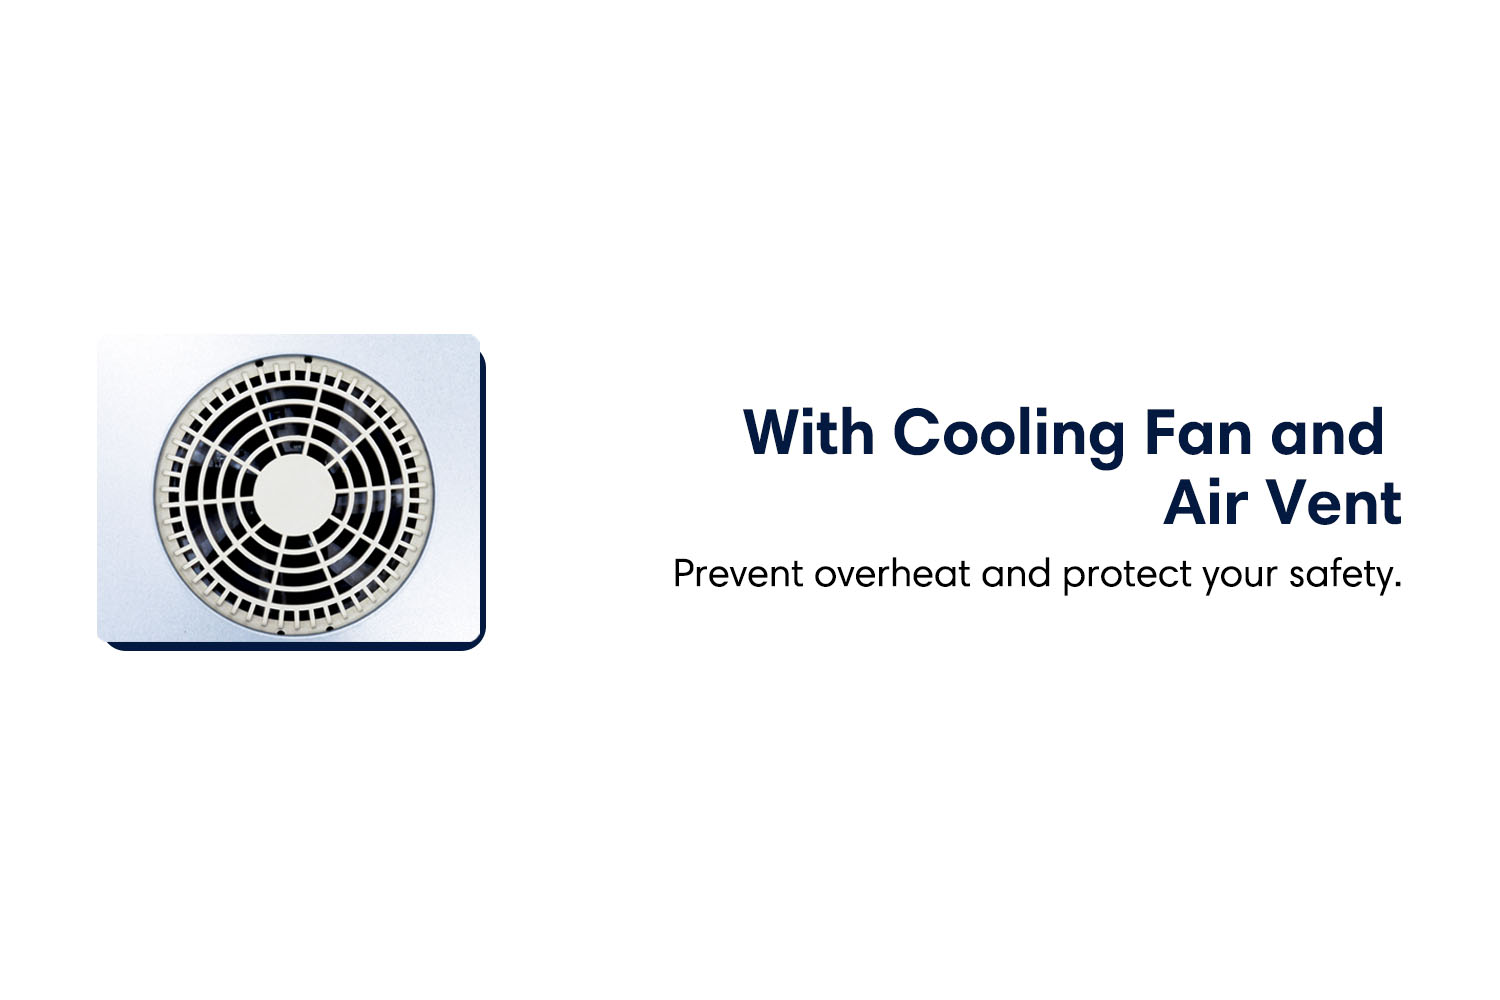 With cooling fan and air vent prevent overheat and protect your safety